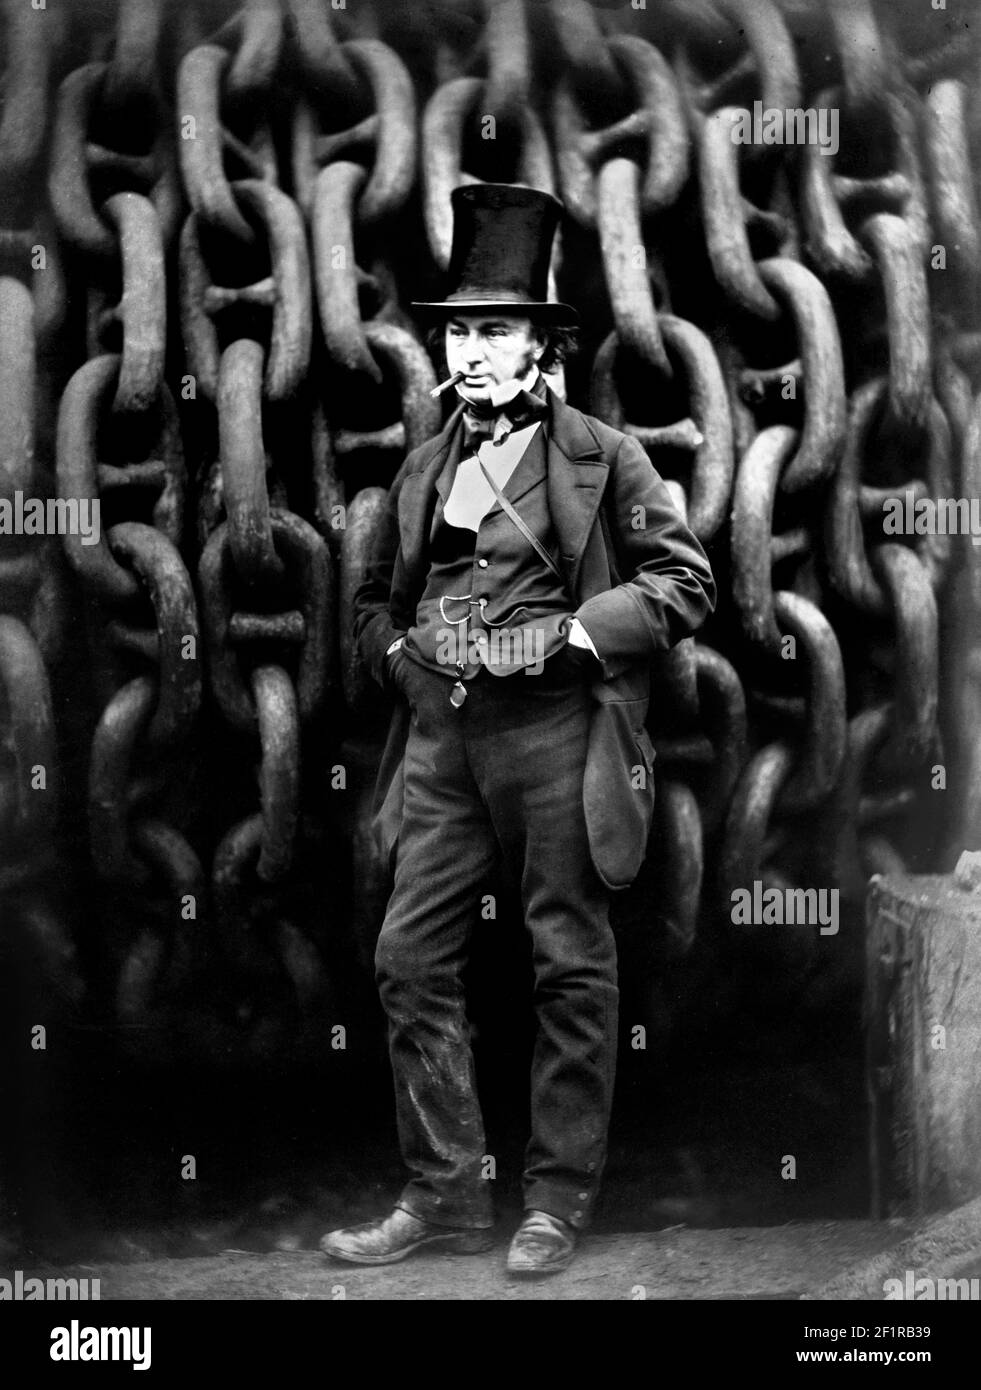 Isambard Kingdom Brunel. Portrait entitled "Isambard Kingdom Brunel Standing Before the Launching Chains of the Great Eastern"  by Robert Howlett, 1857. Brunel (1806-1859) was the most celebrated civil engineer of the nineteenth century. Stock Photo